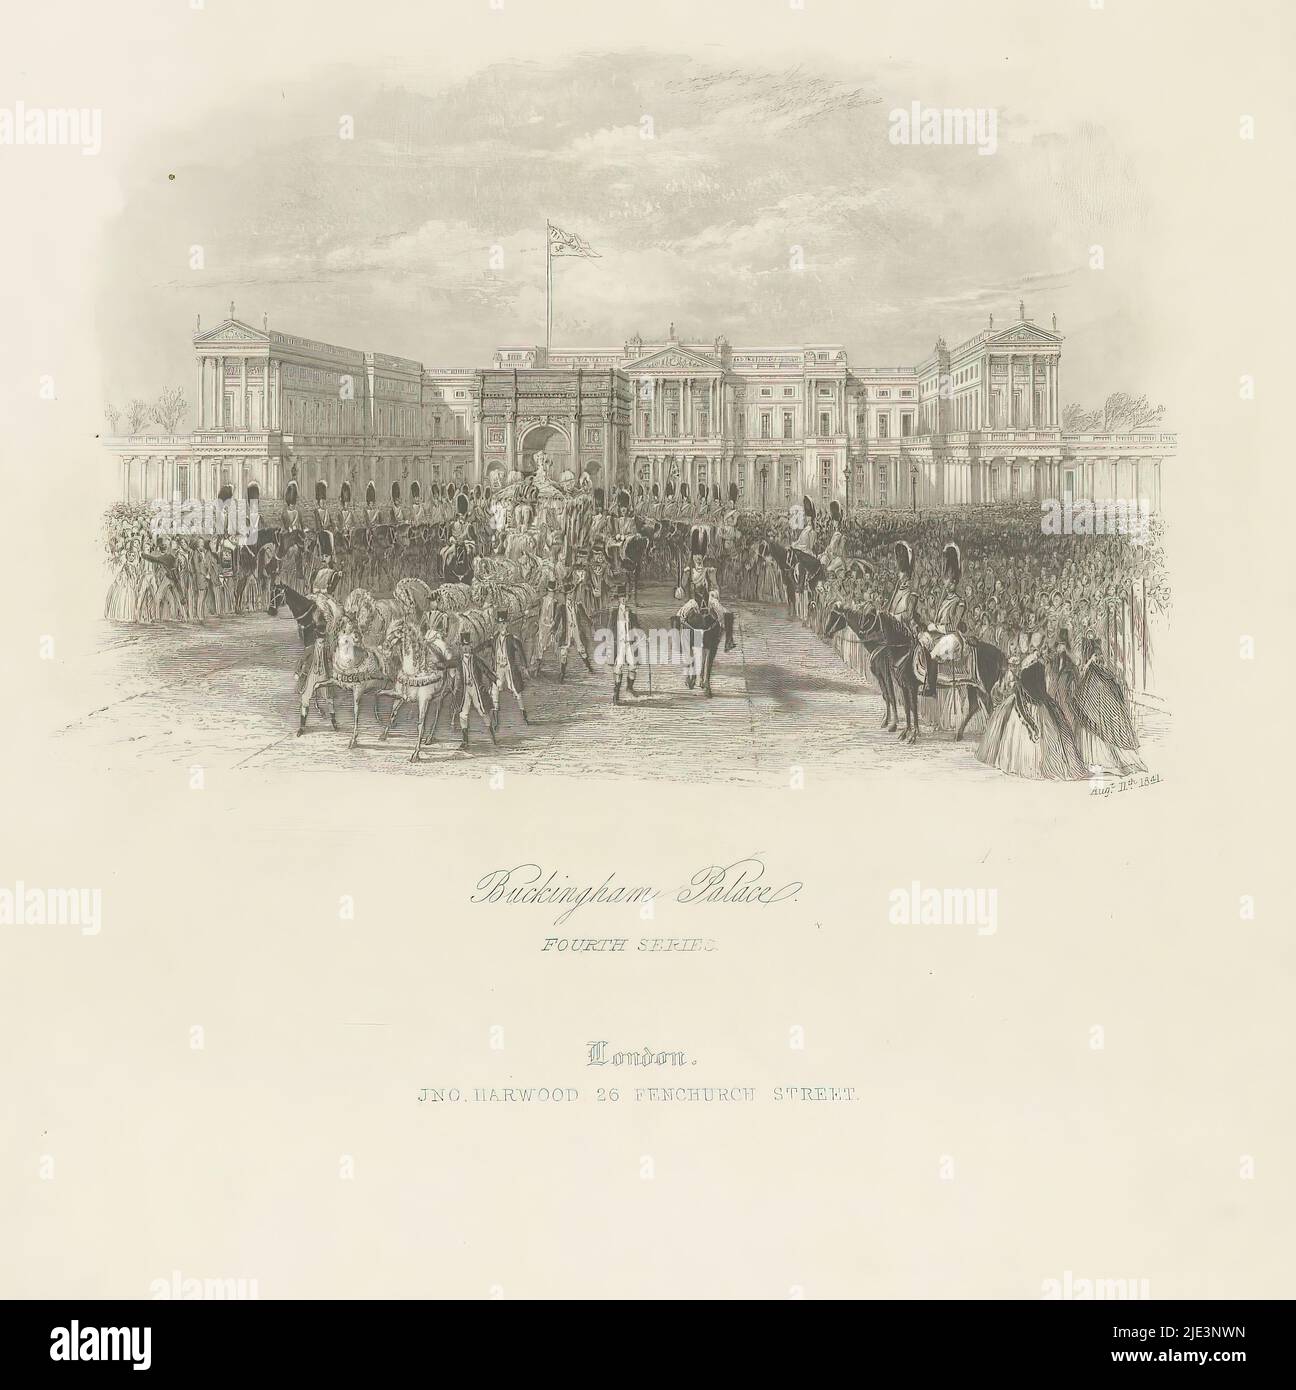 View of Buckingham Palace, Buckingham Palace (title on object), print maker: anonymous, publisher: Harwood, (mentioned on object), London, 1841, paper, steel engraving, height 228 mm × width 187 mm Stock Photo